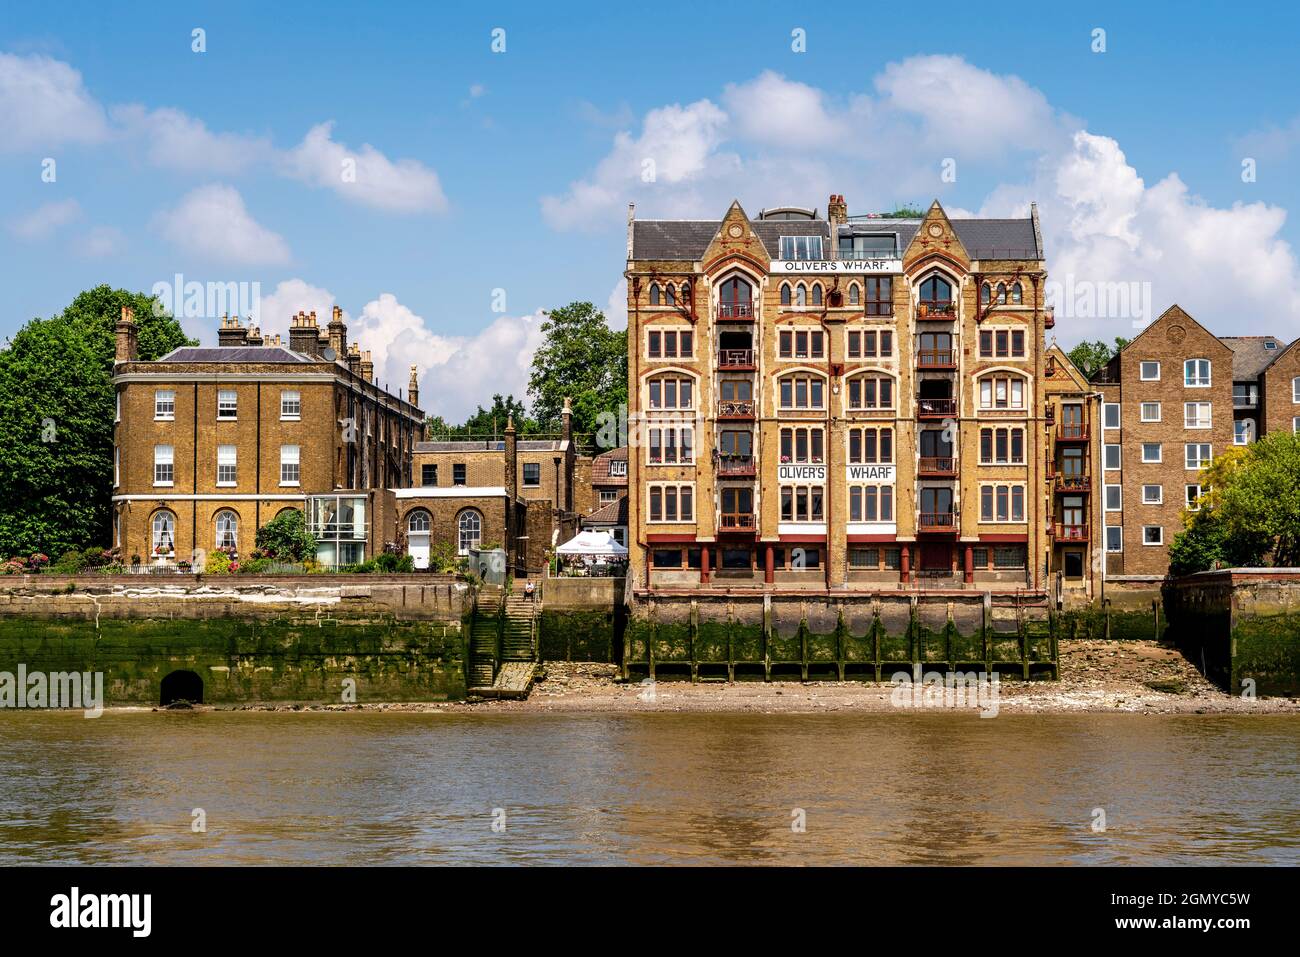 Oliver's Wharf Apartment Building, The River Thames and the Wapping Old Stairs, London, Großbritannien. Stockfoto